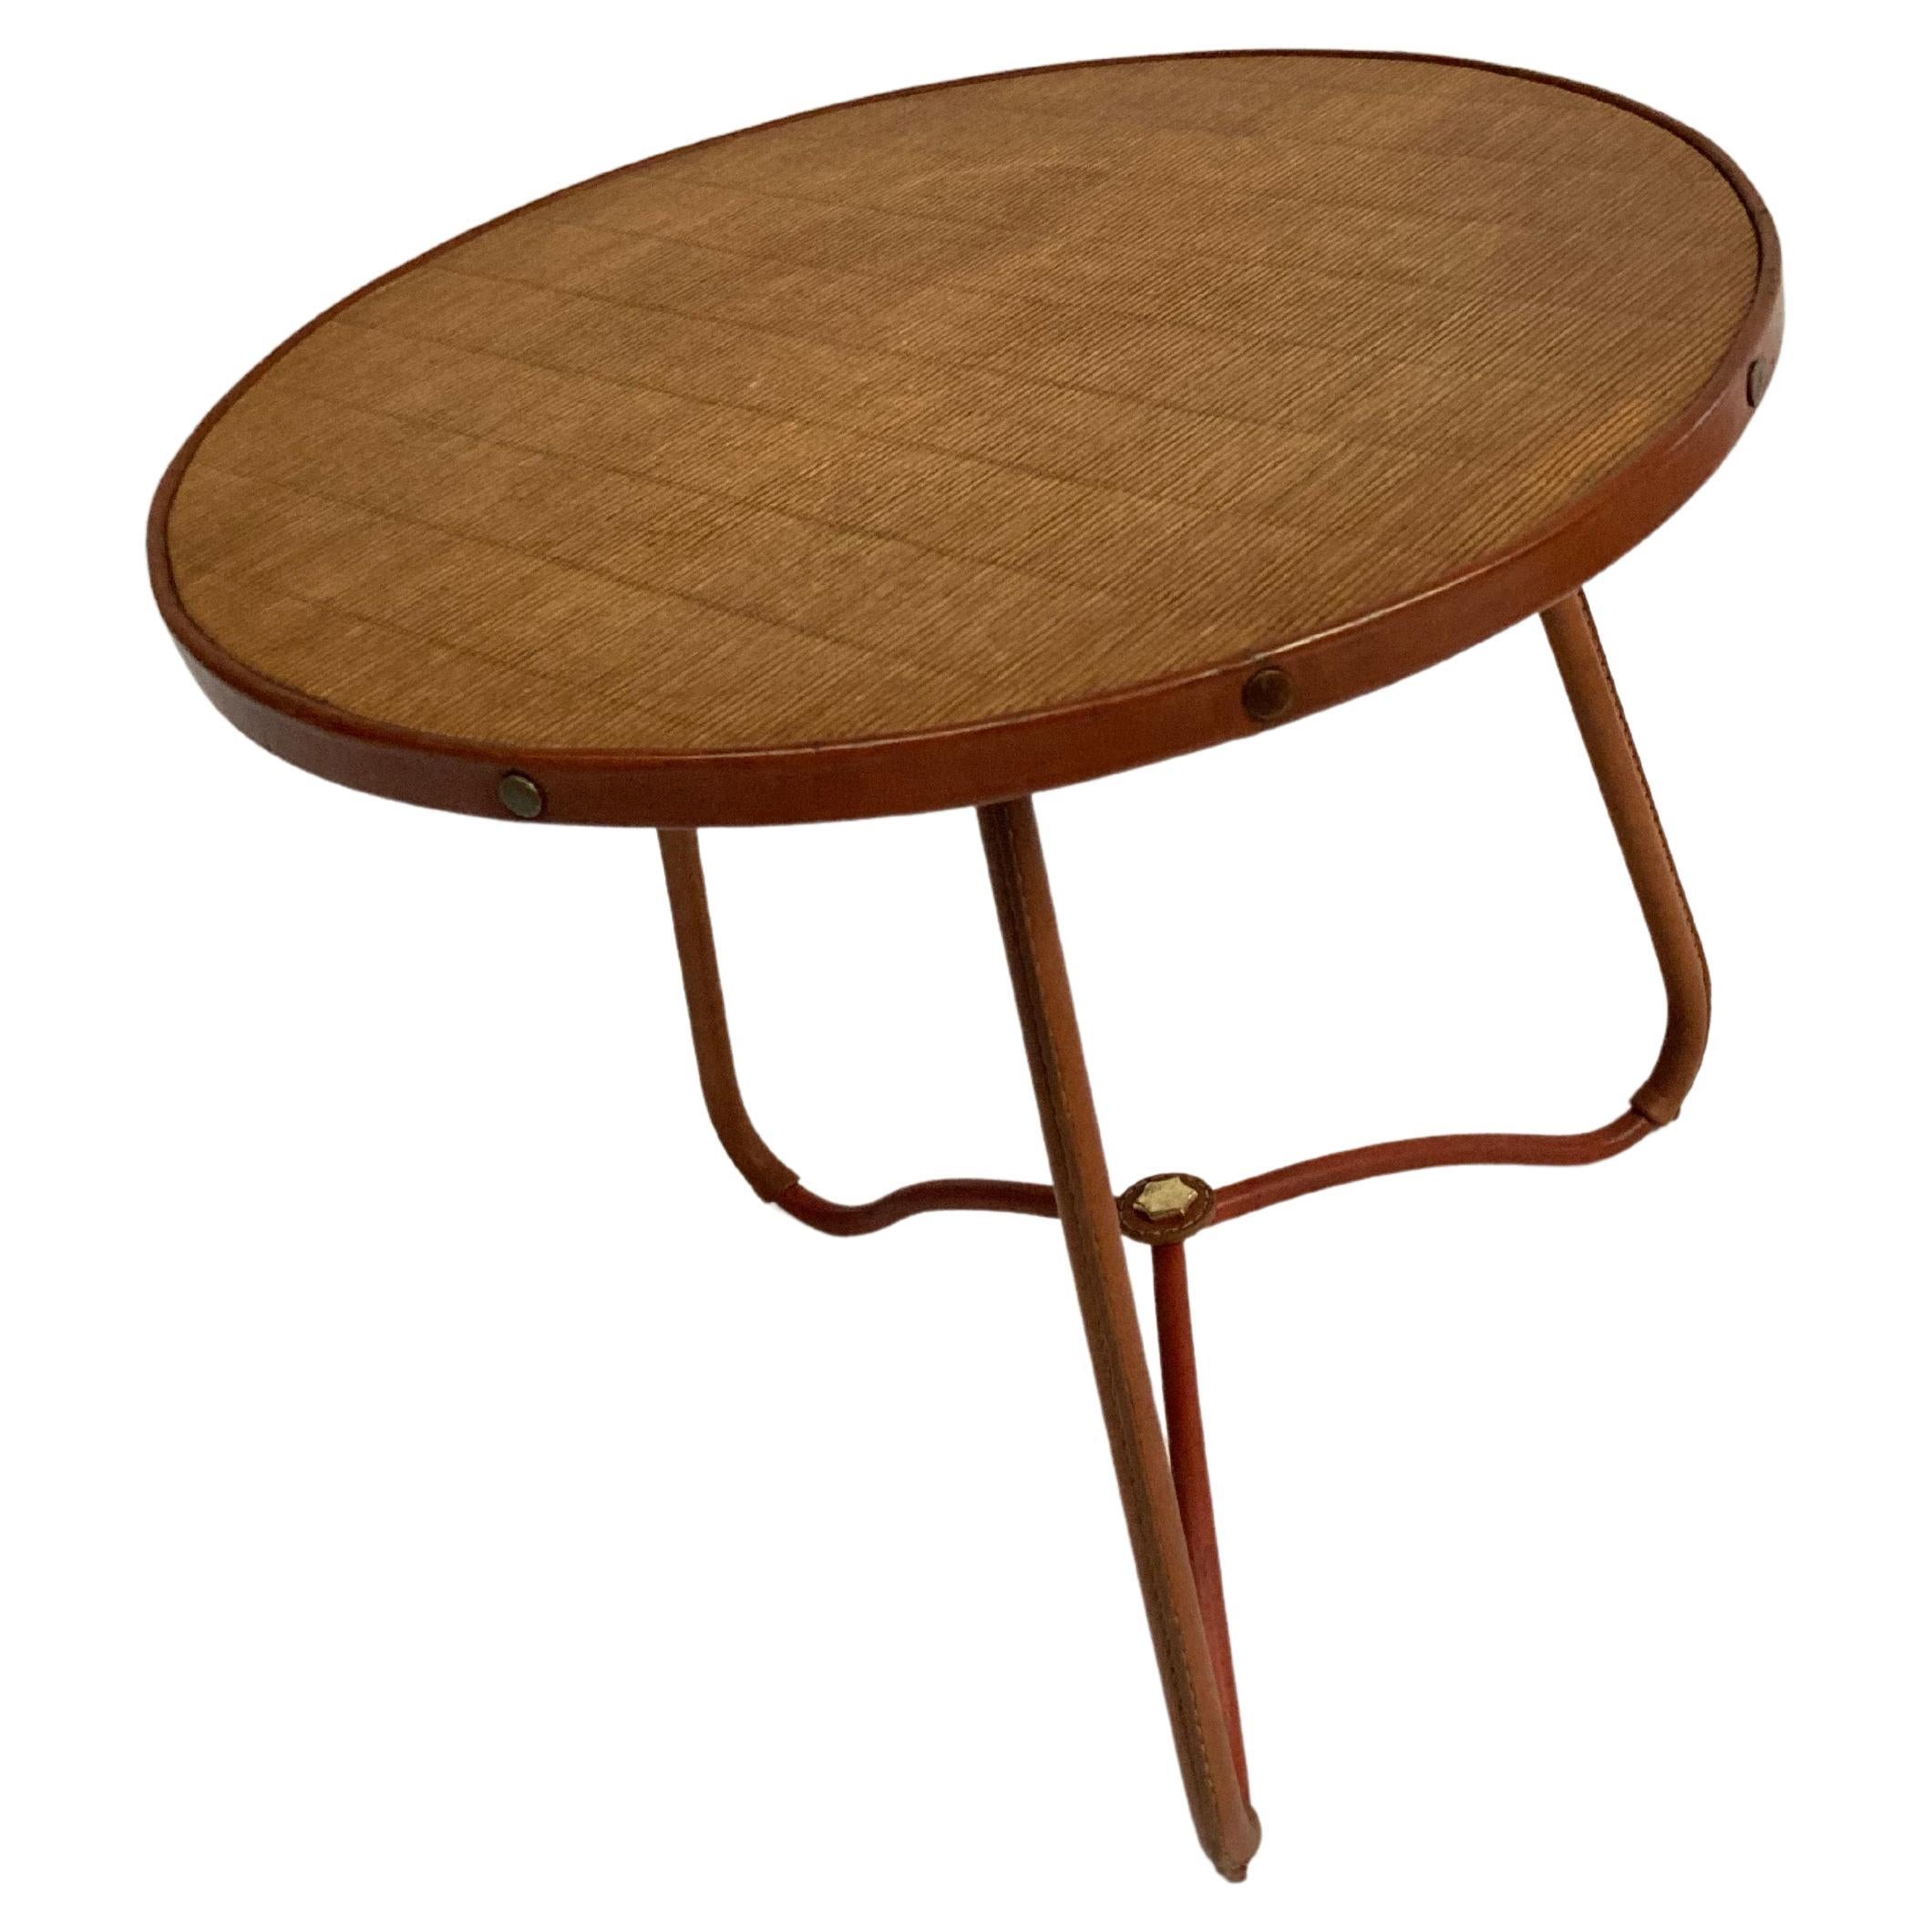 1950's Stitched leather table by Jacques Adnet
France.